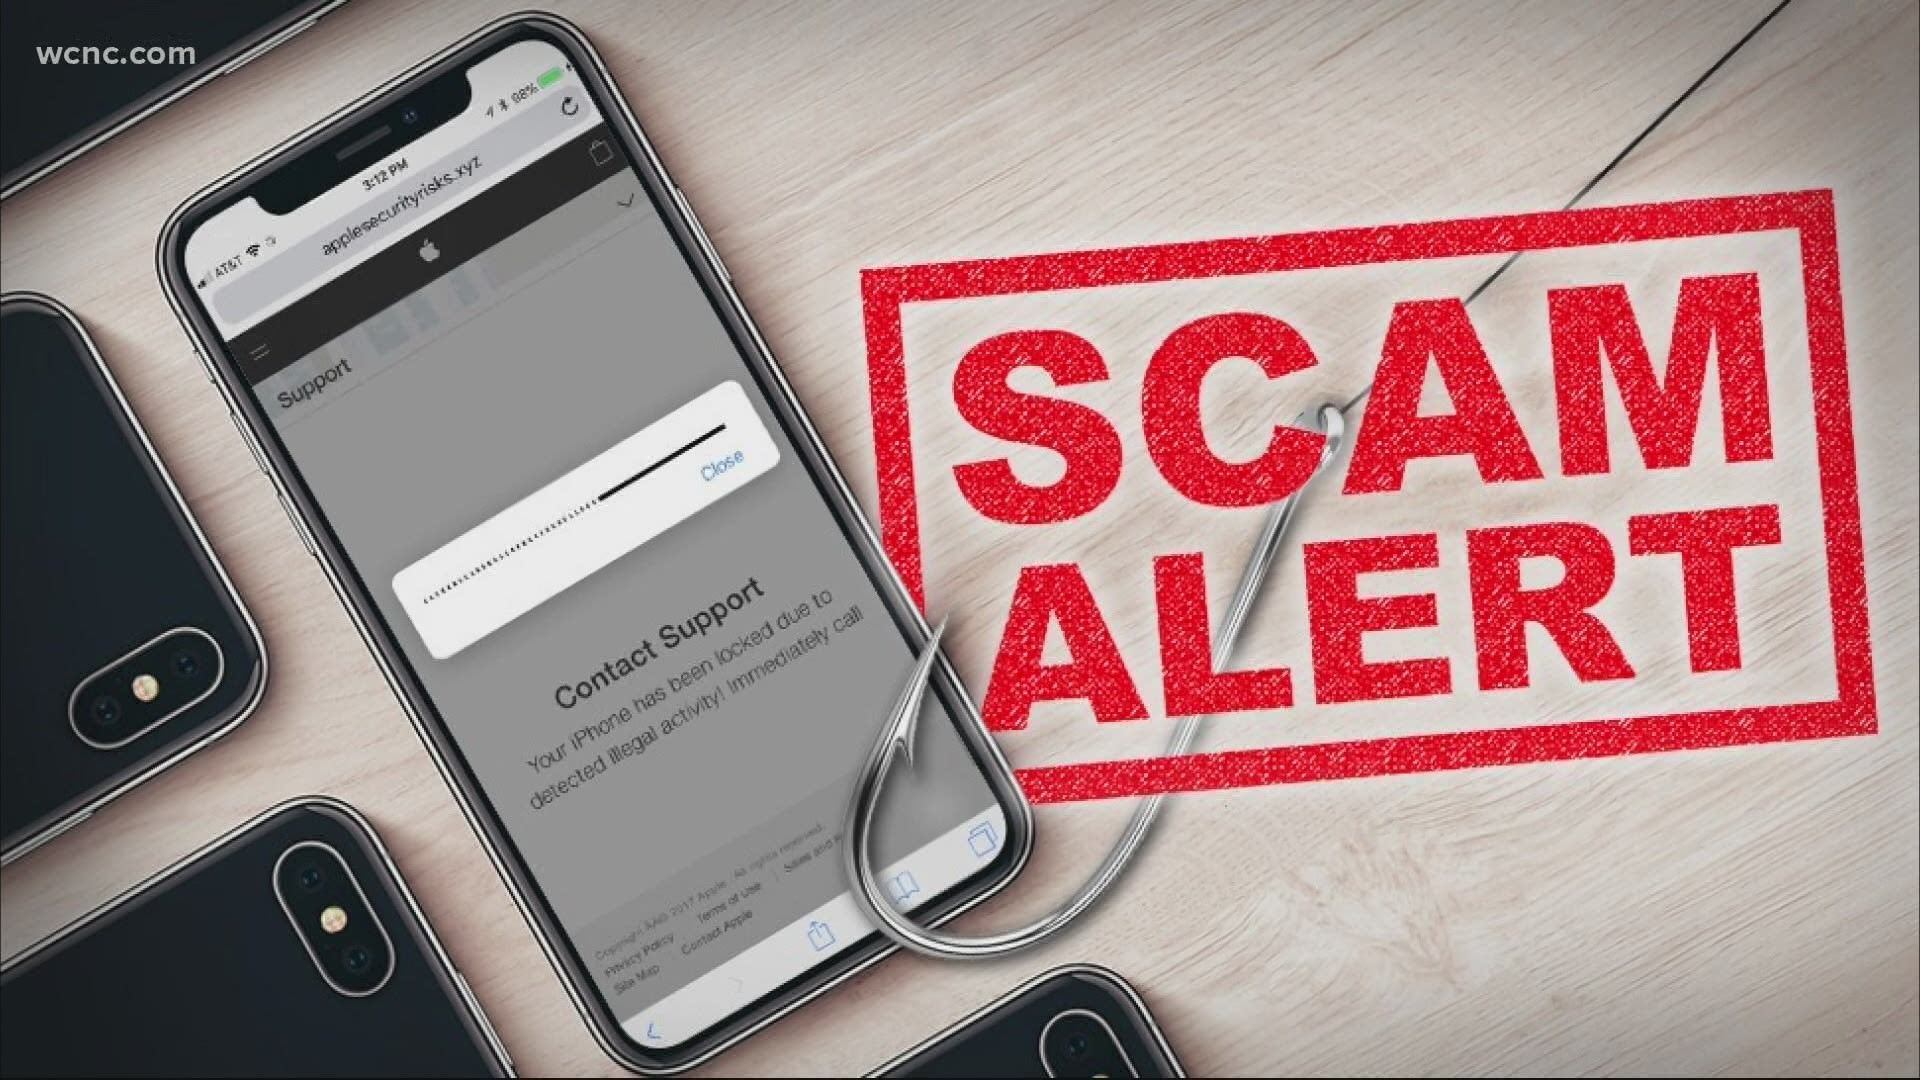 Reader's Digest phone scam reported in Charlottetown, say police